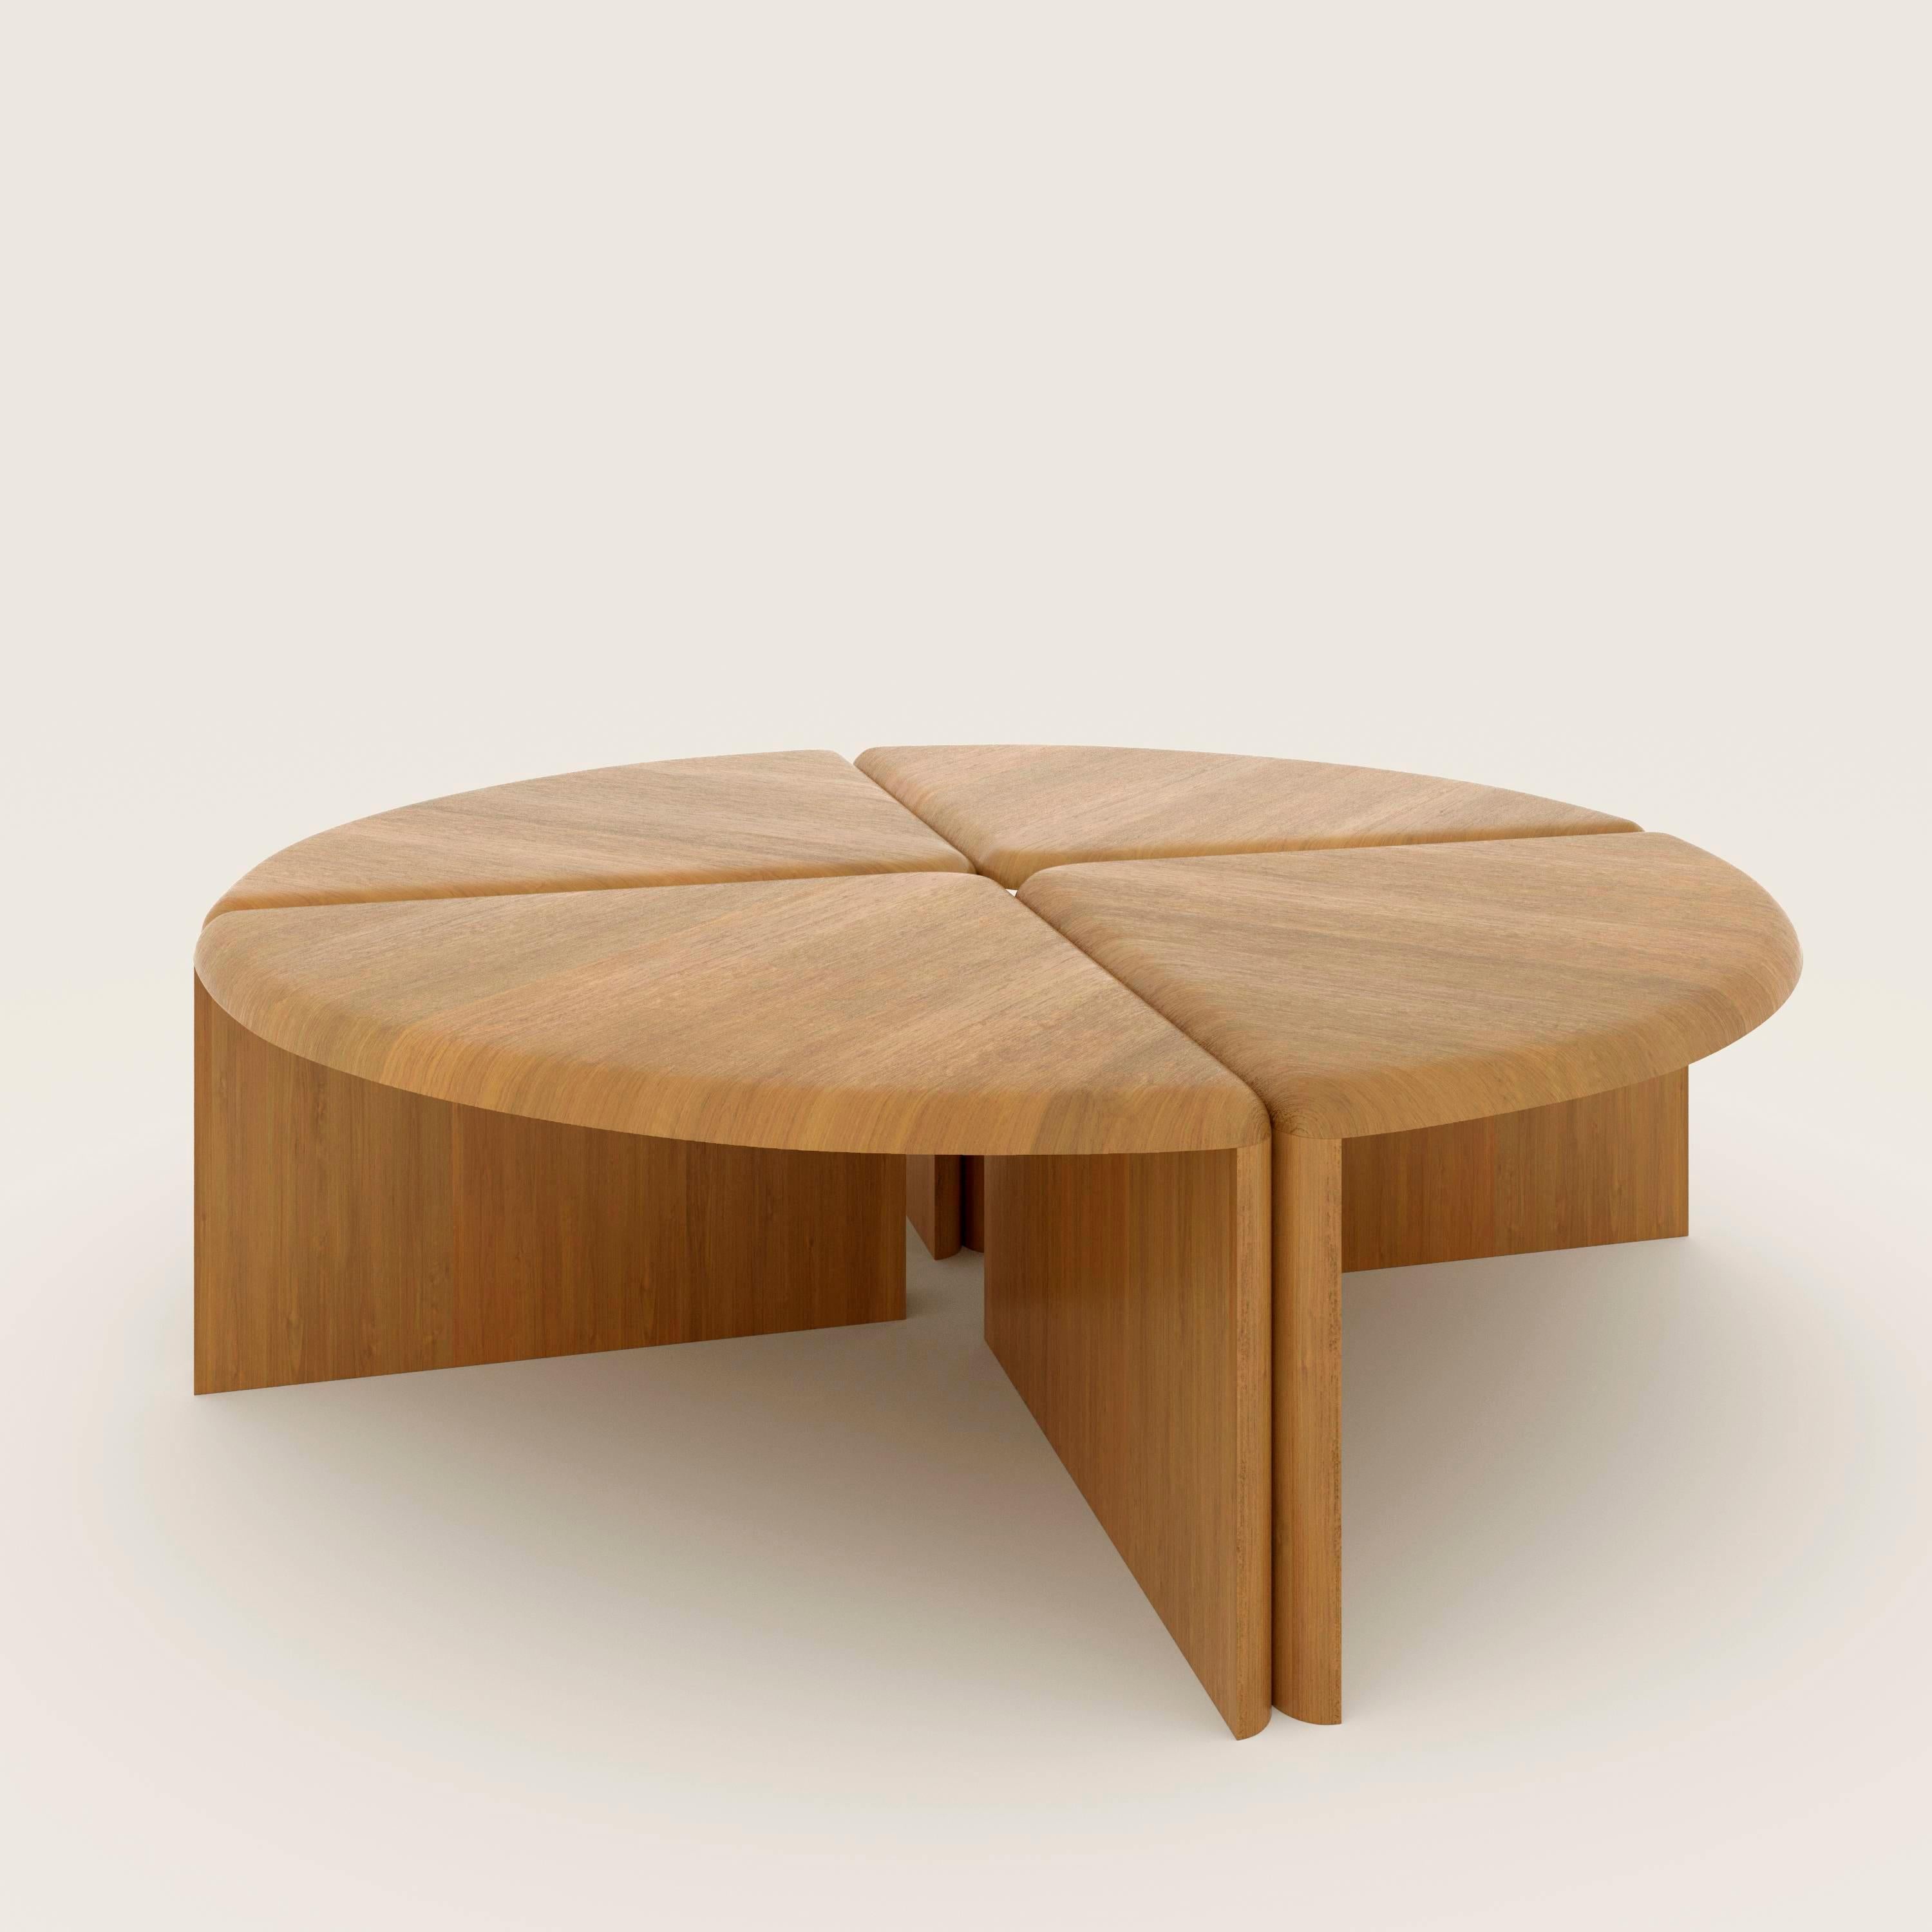 Lily Round Oak Coffee Table by Fred and Juul
Dimensions: Ø 122 x H 36 cm.
Materials: Oak.

Available in oak, evonized oak and in Navona Travertine. Custom sizes, materials or finishes are available on request. Please contact us.

A coffee table